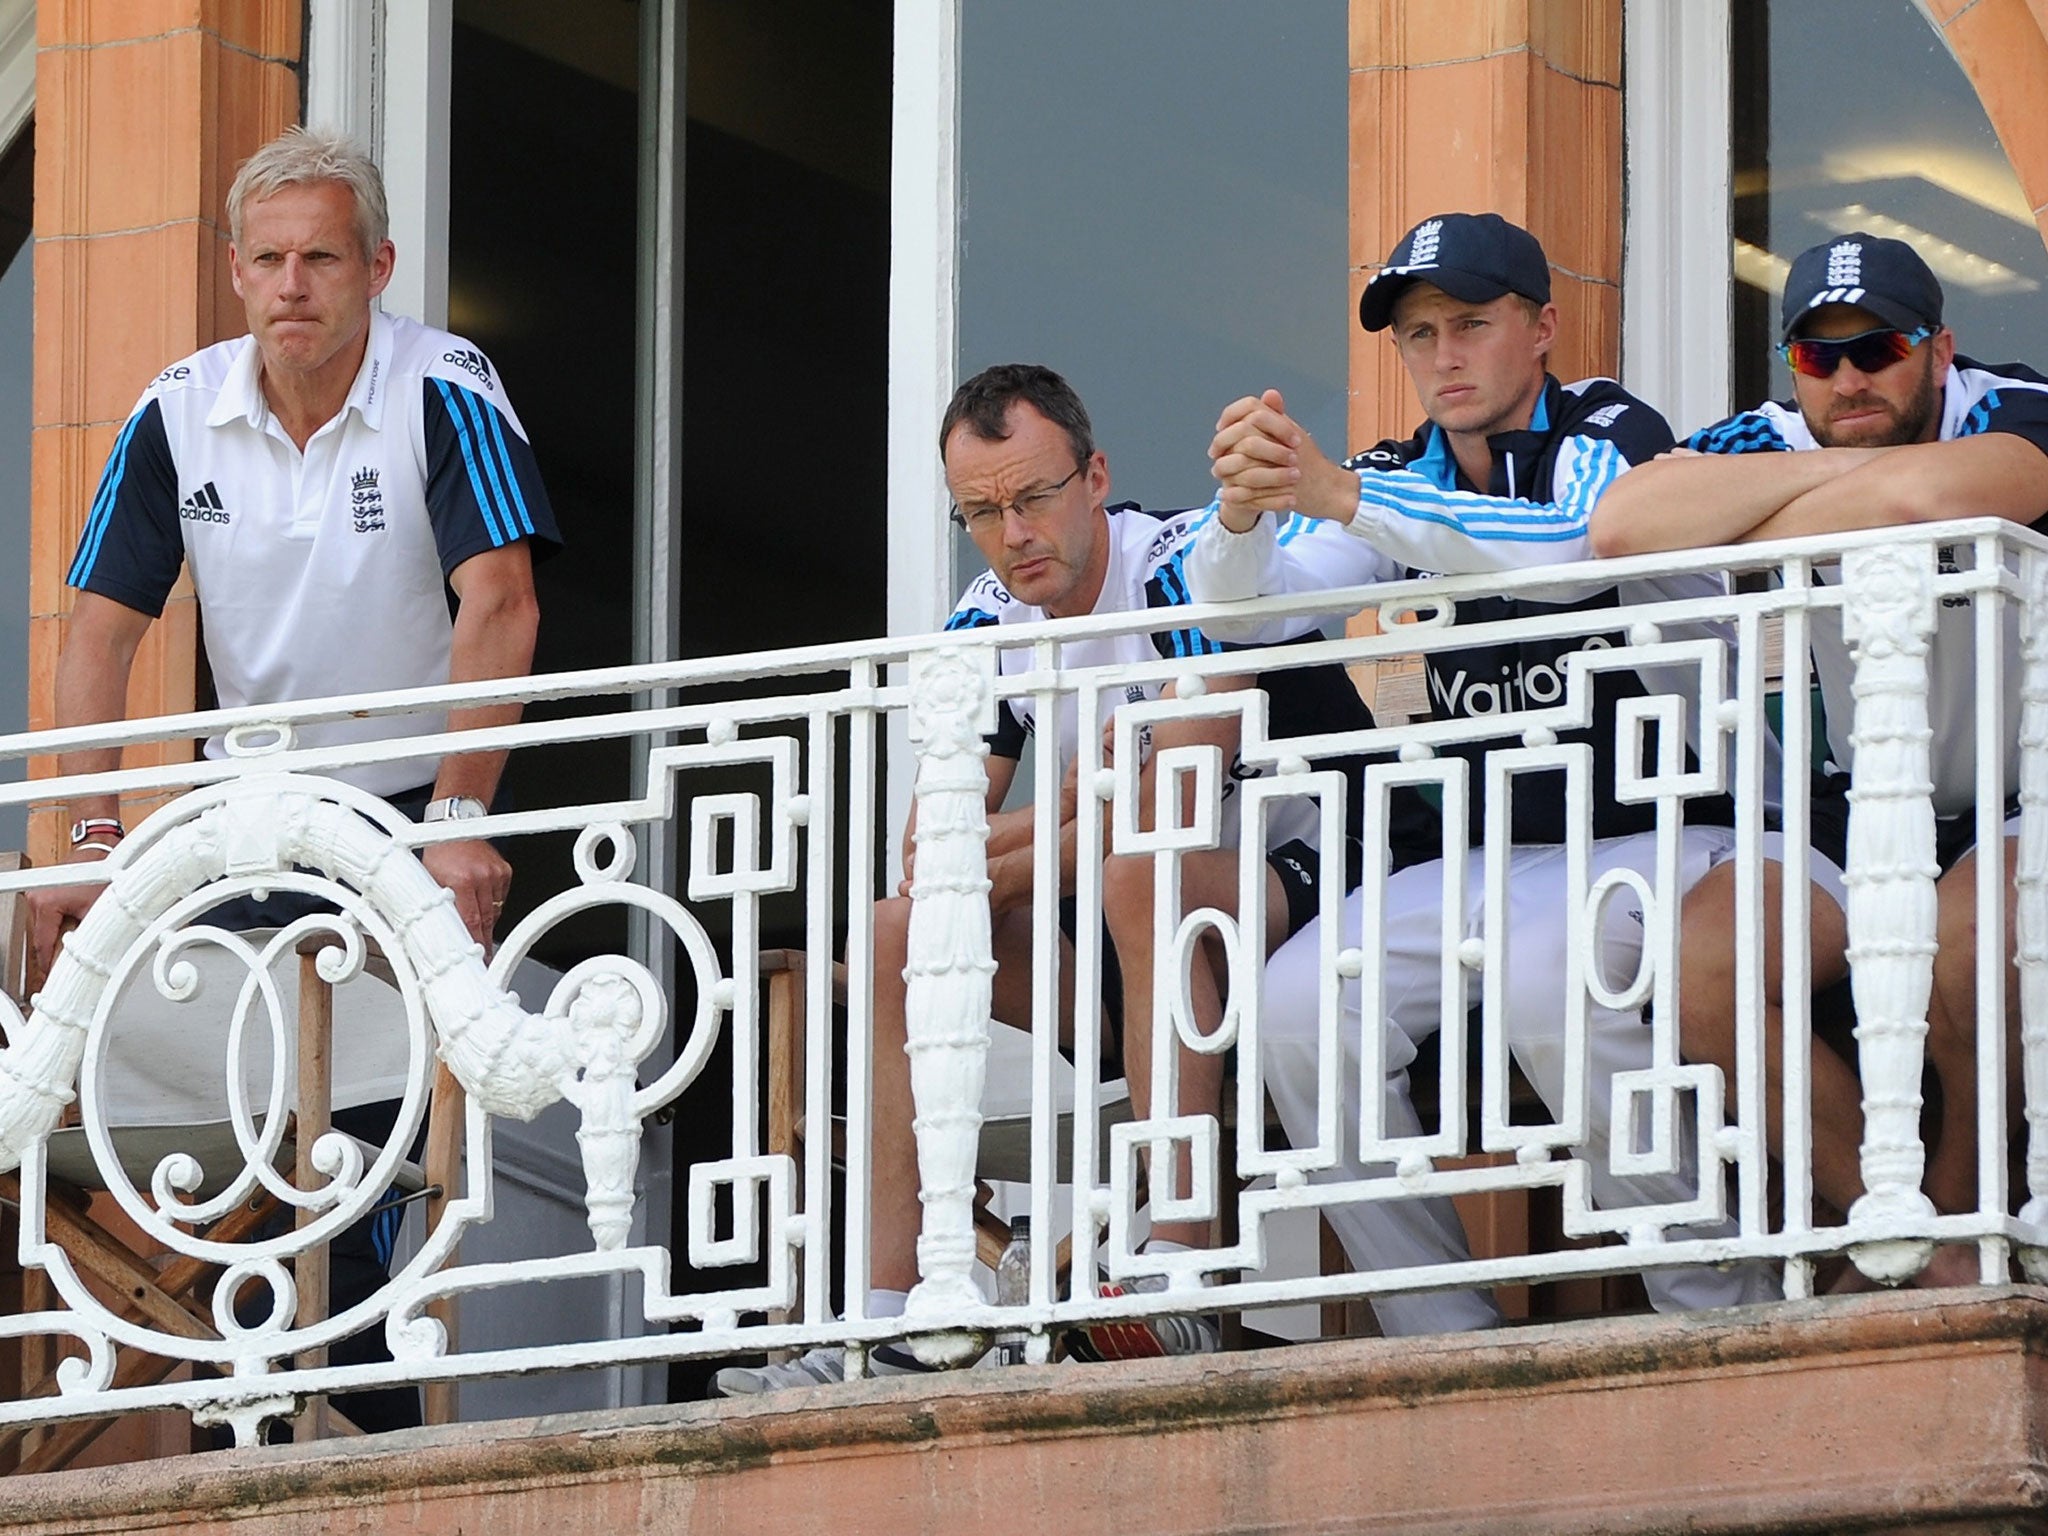 The faces of England’s players and coaches on the dressing room balcony during the second Test at Lord’s give the game away